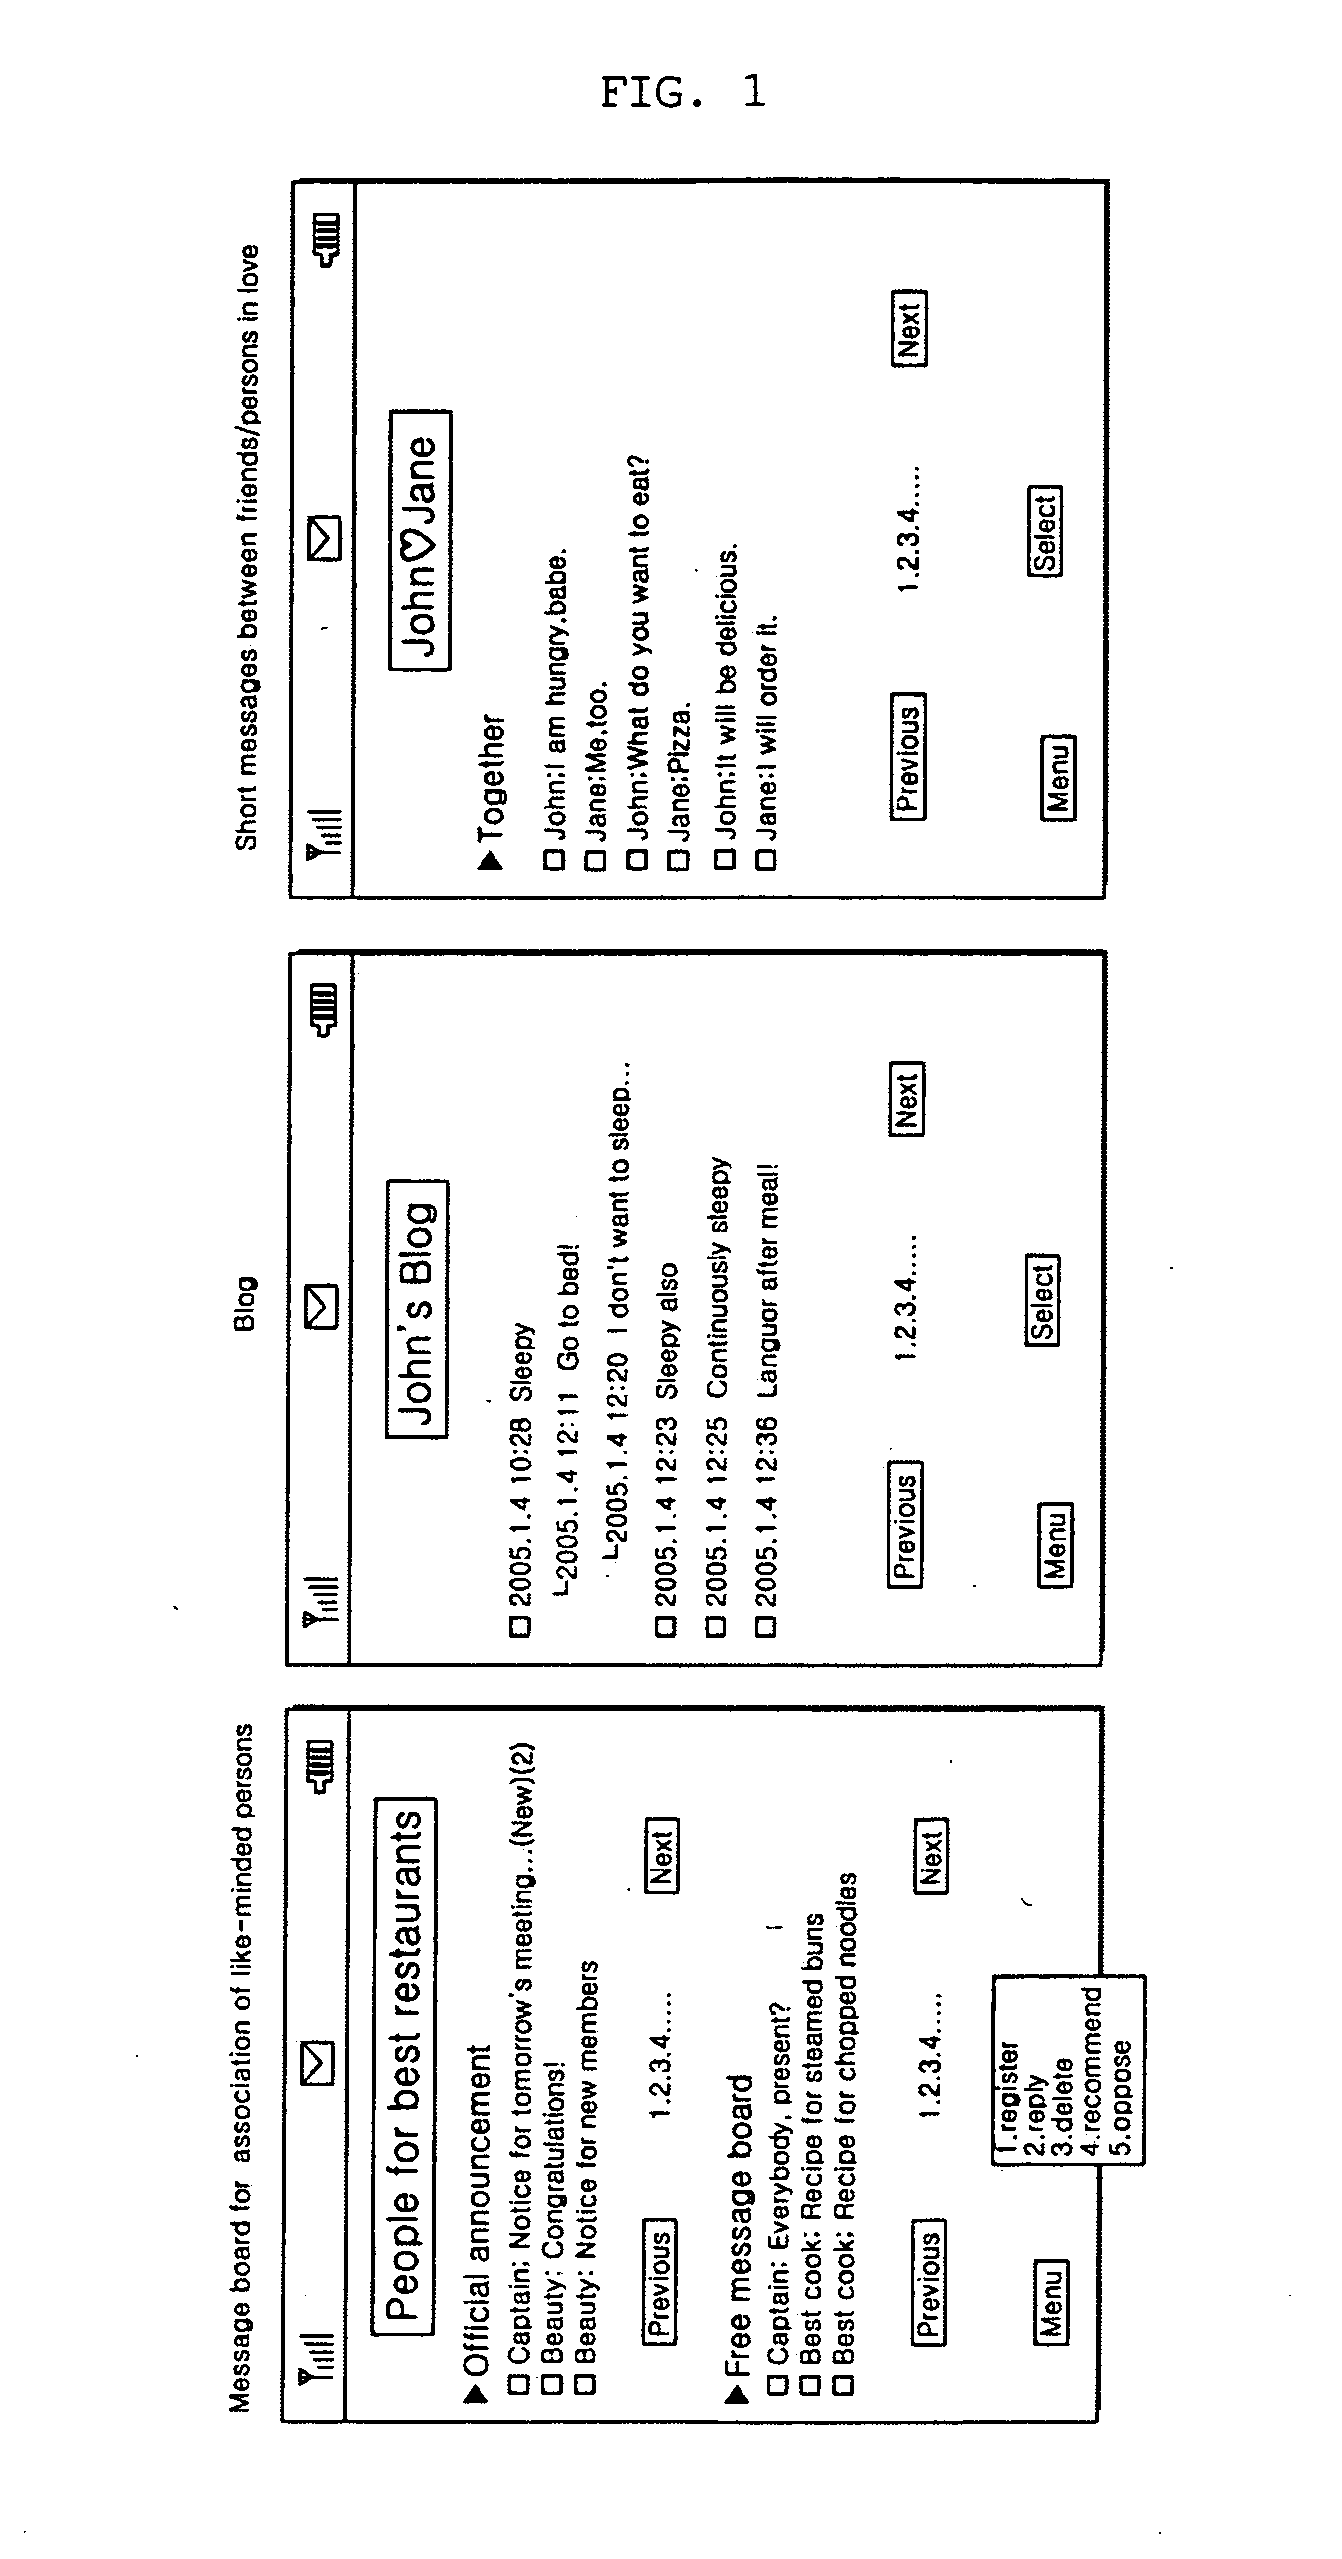 Short message management system using a VM application and a mobile communication terminal